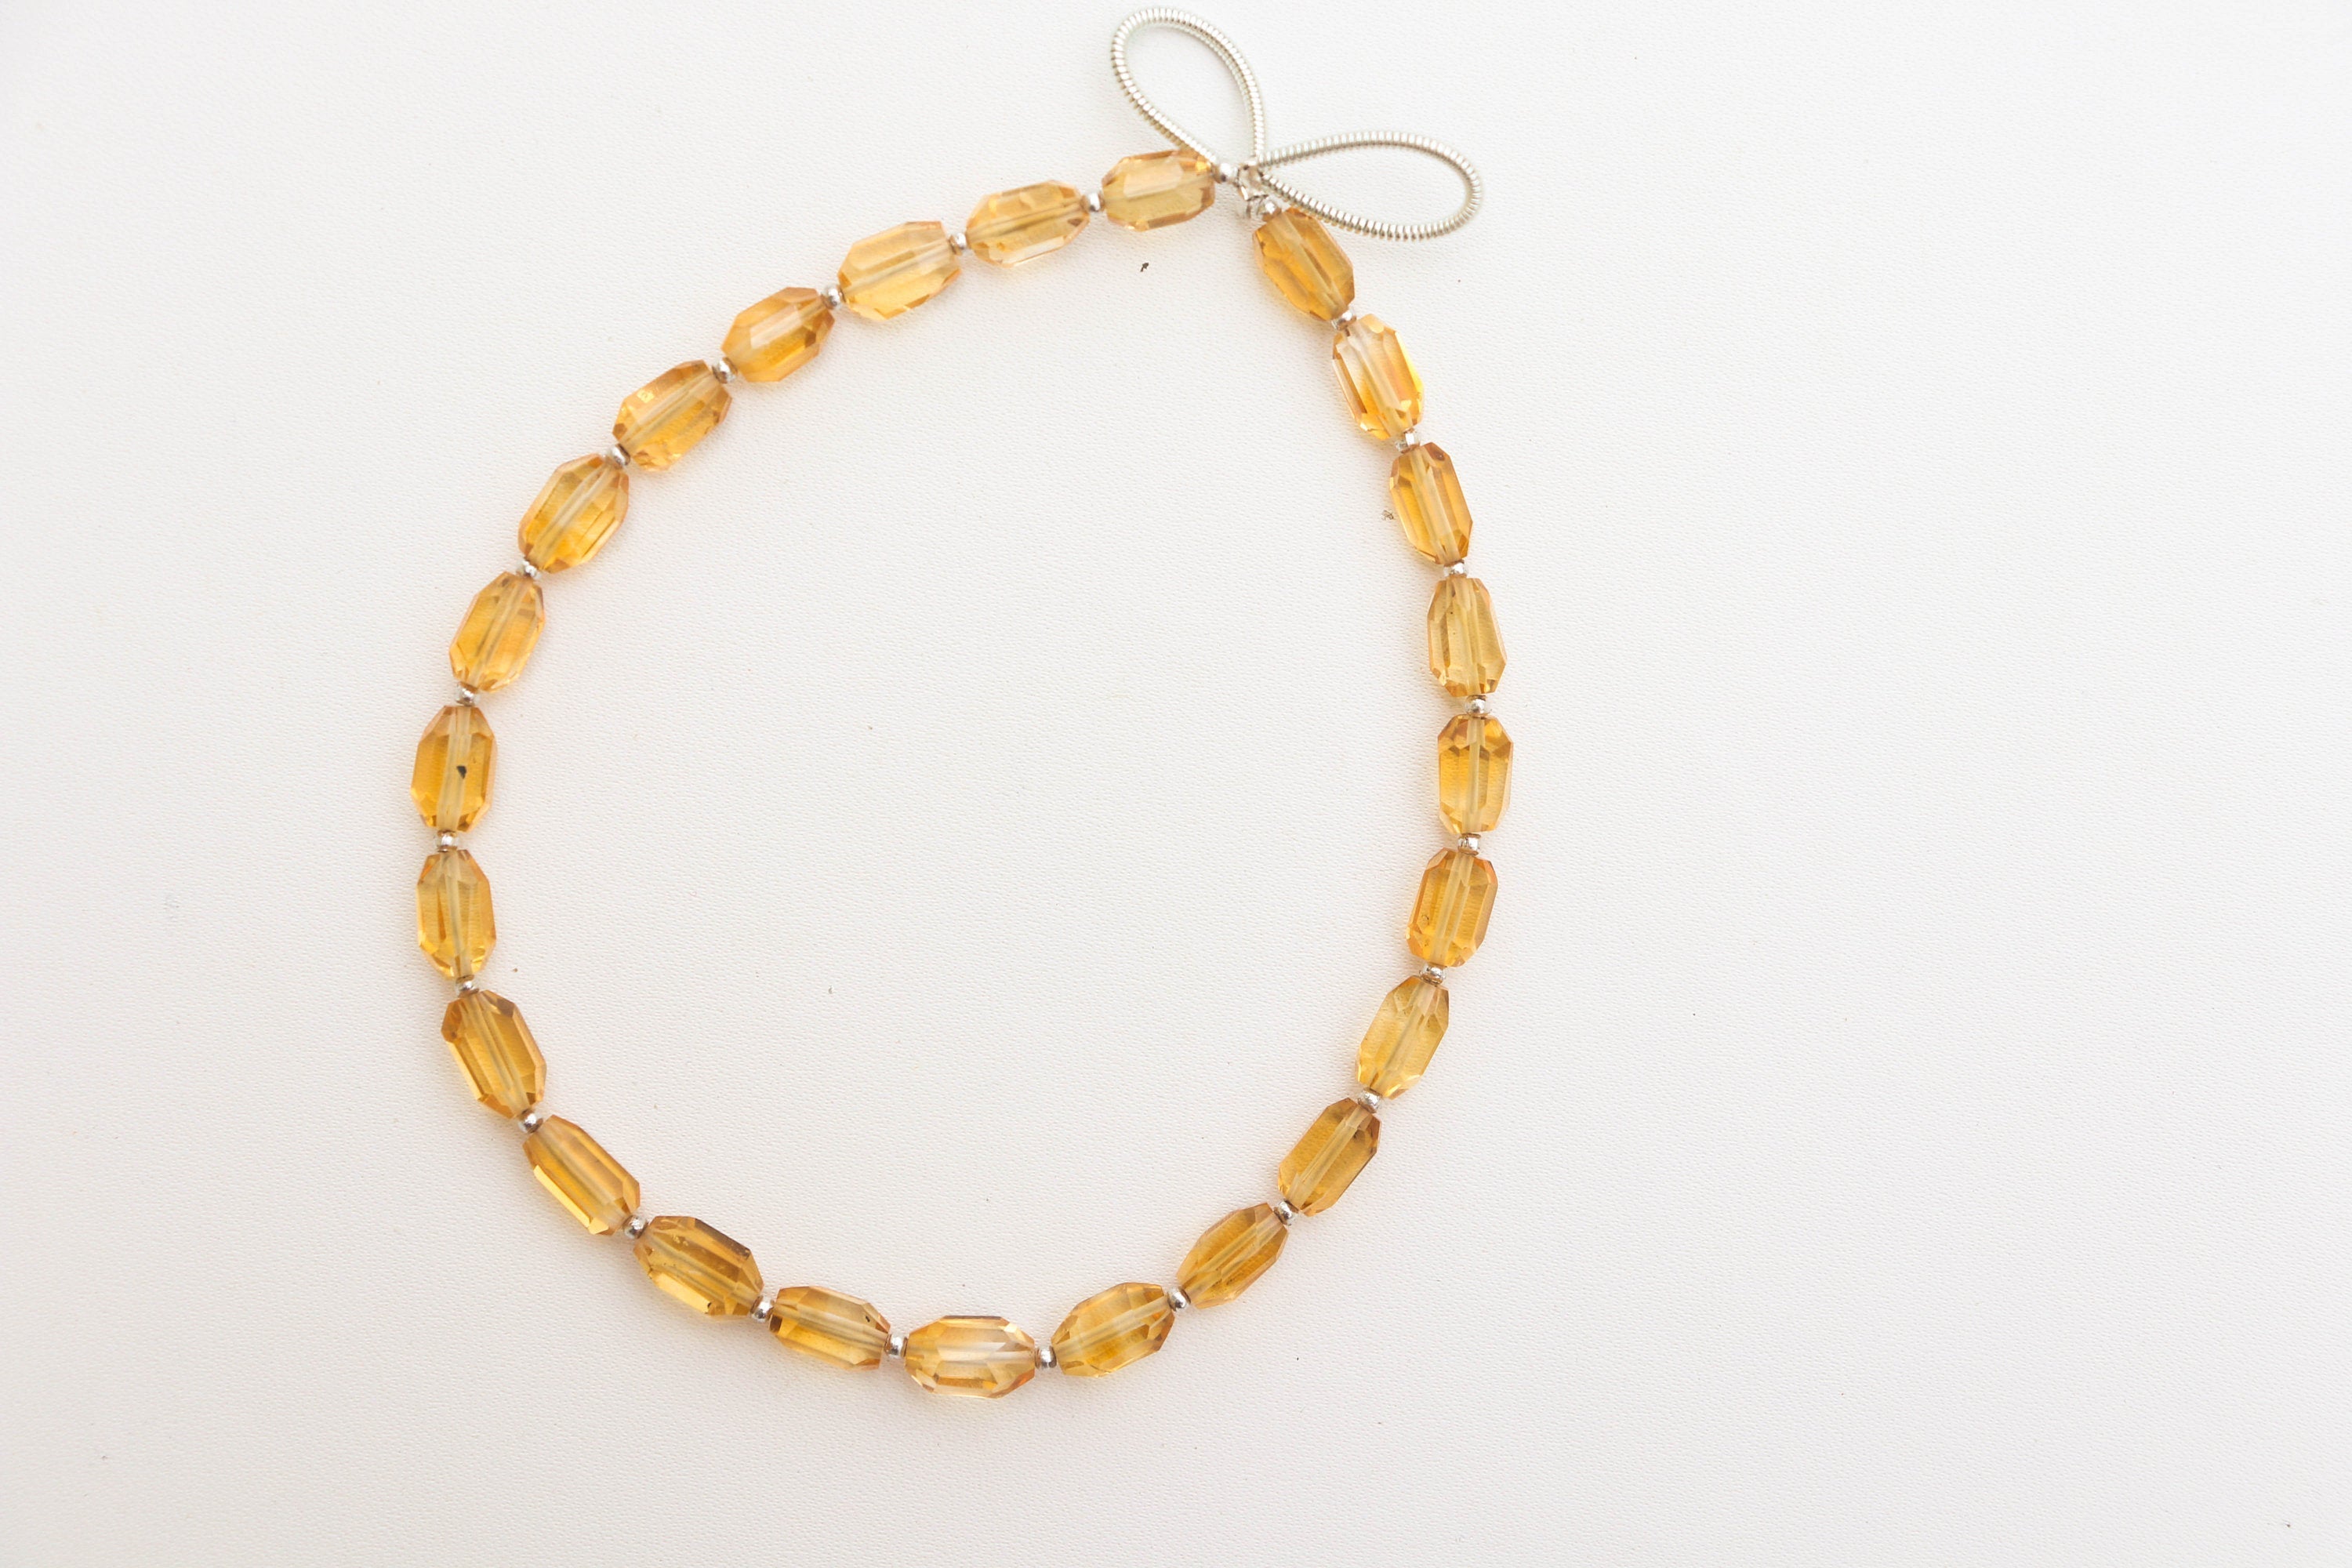 CITRINE beads uneven faceted tube shape, Citrine Faceted Beads, Citrine briolette, Citrine Drops, Citrine Gemstone beads AAA+ Beadsforyourjewelry